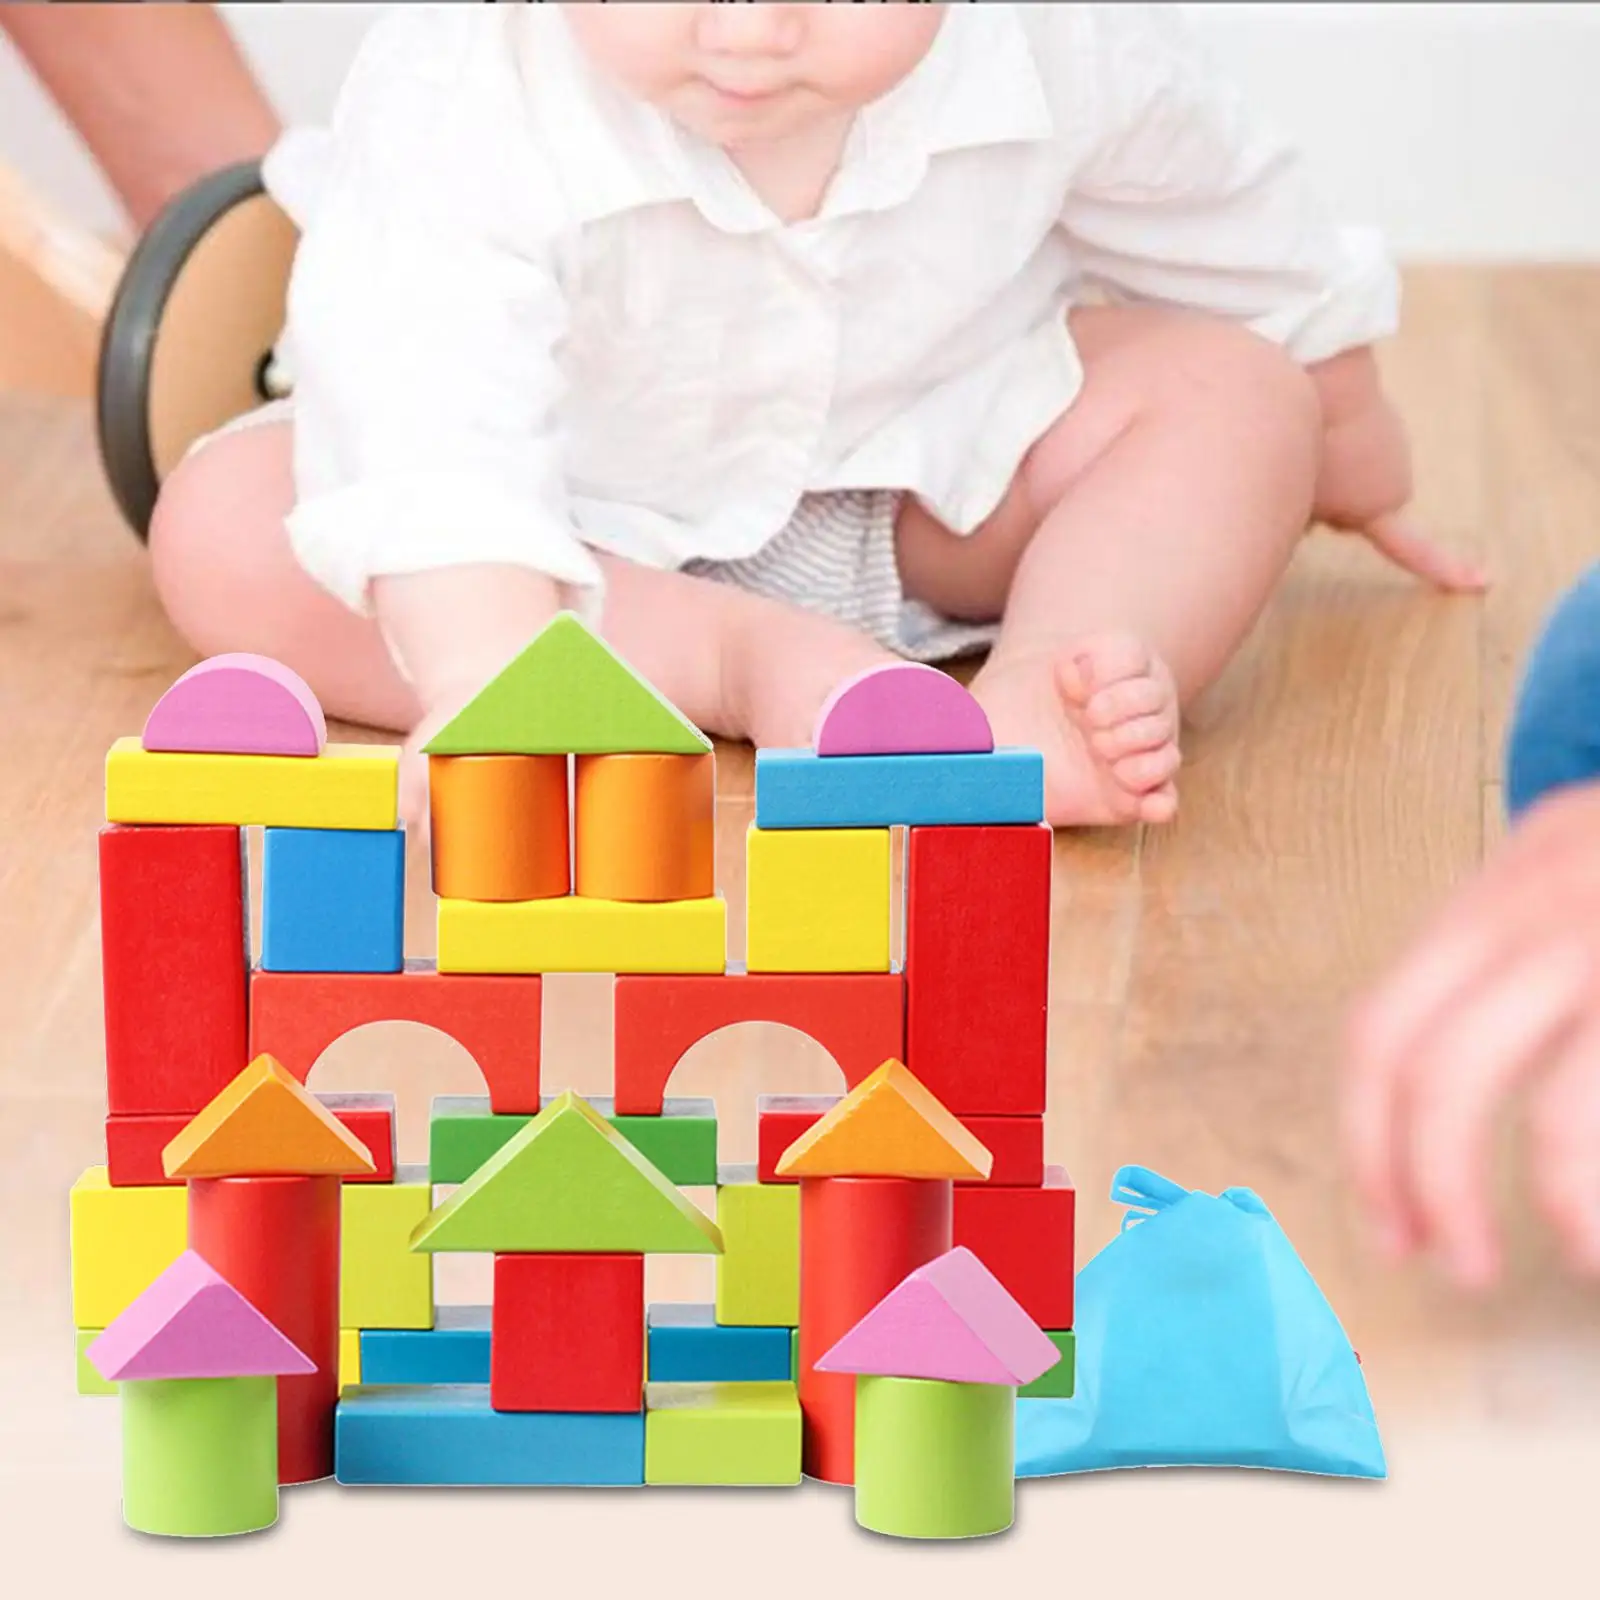 40 Pieces Montessori Building Blocks Education for Children Holiday Gifts